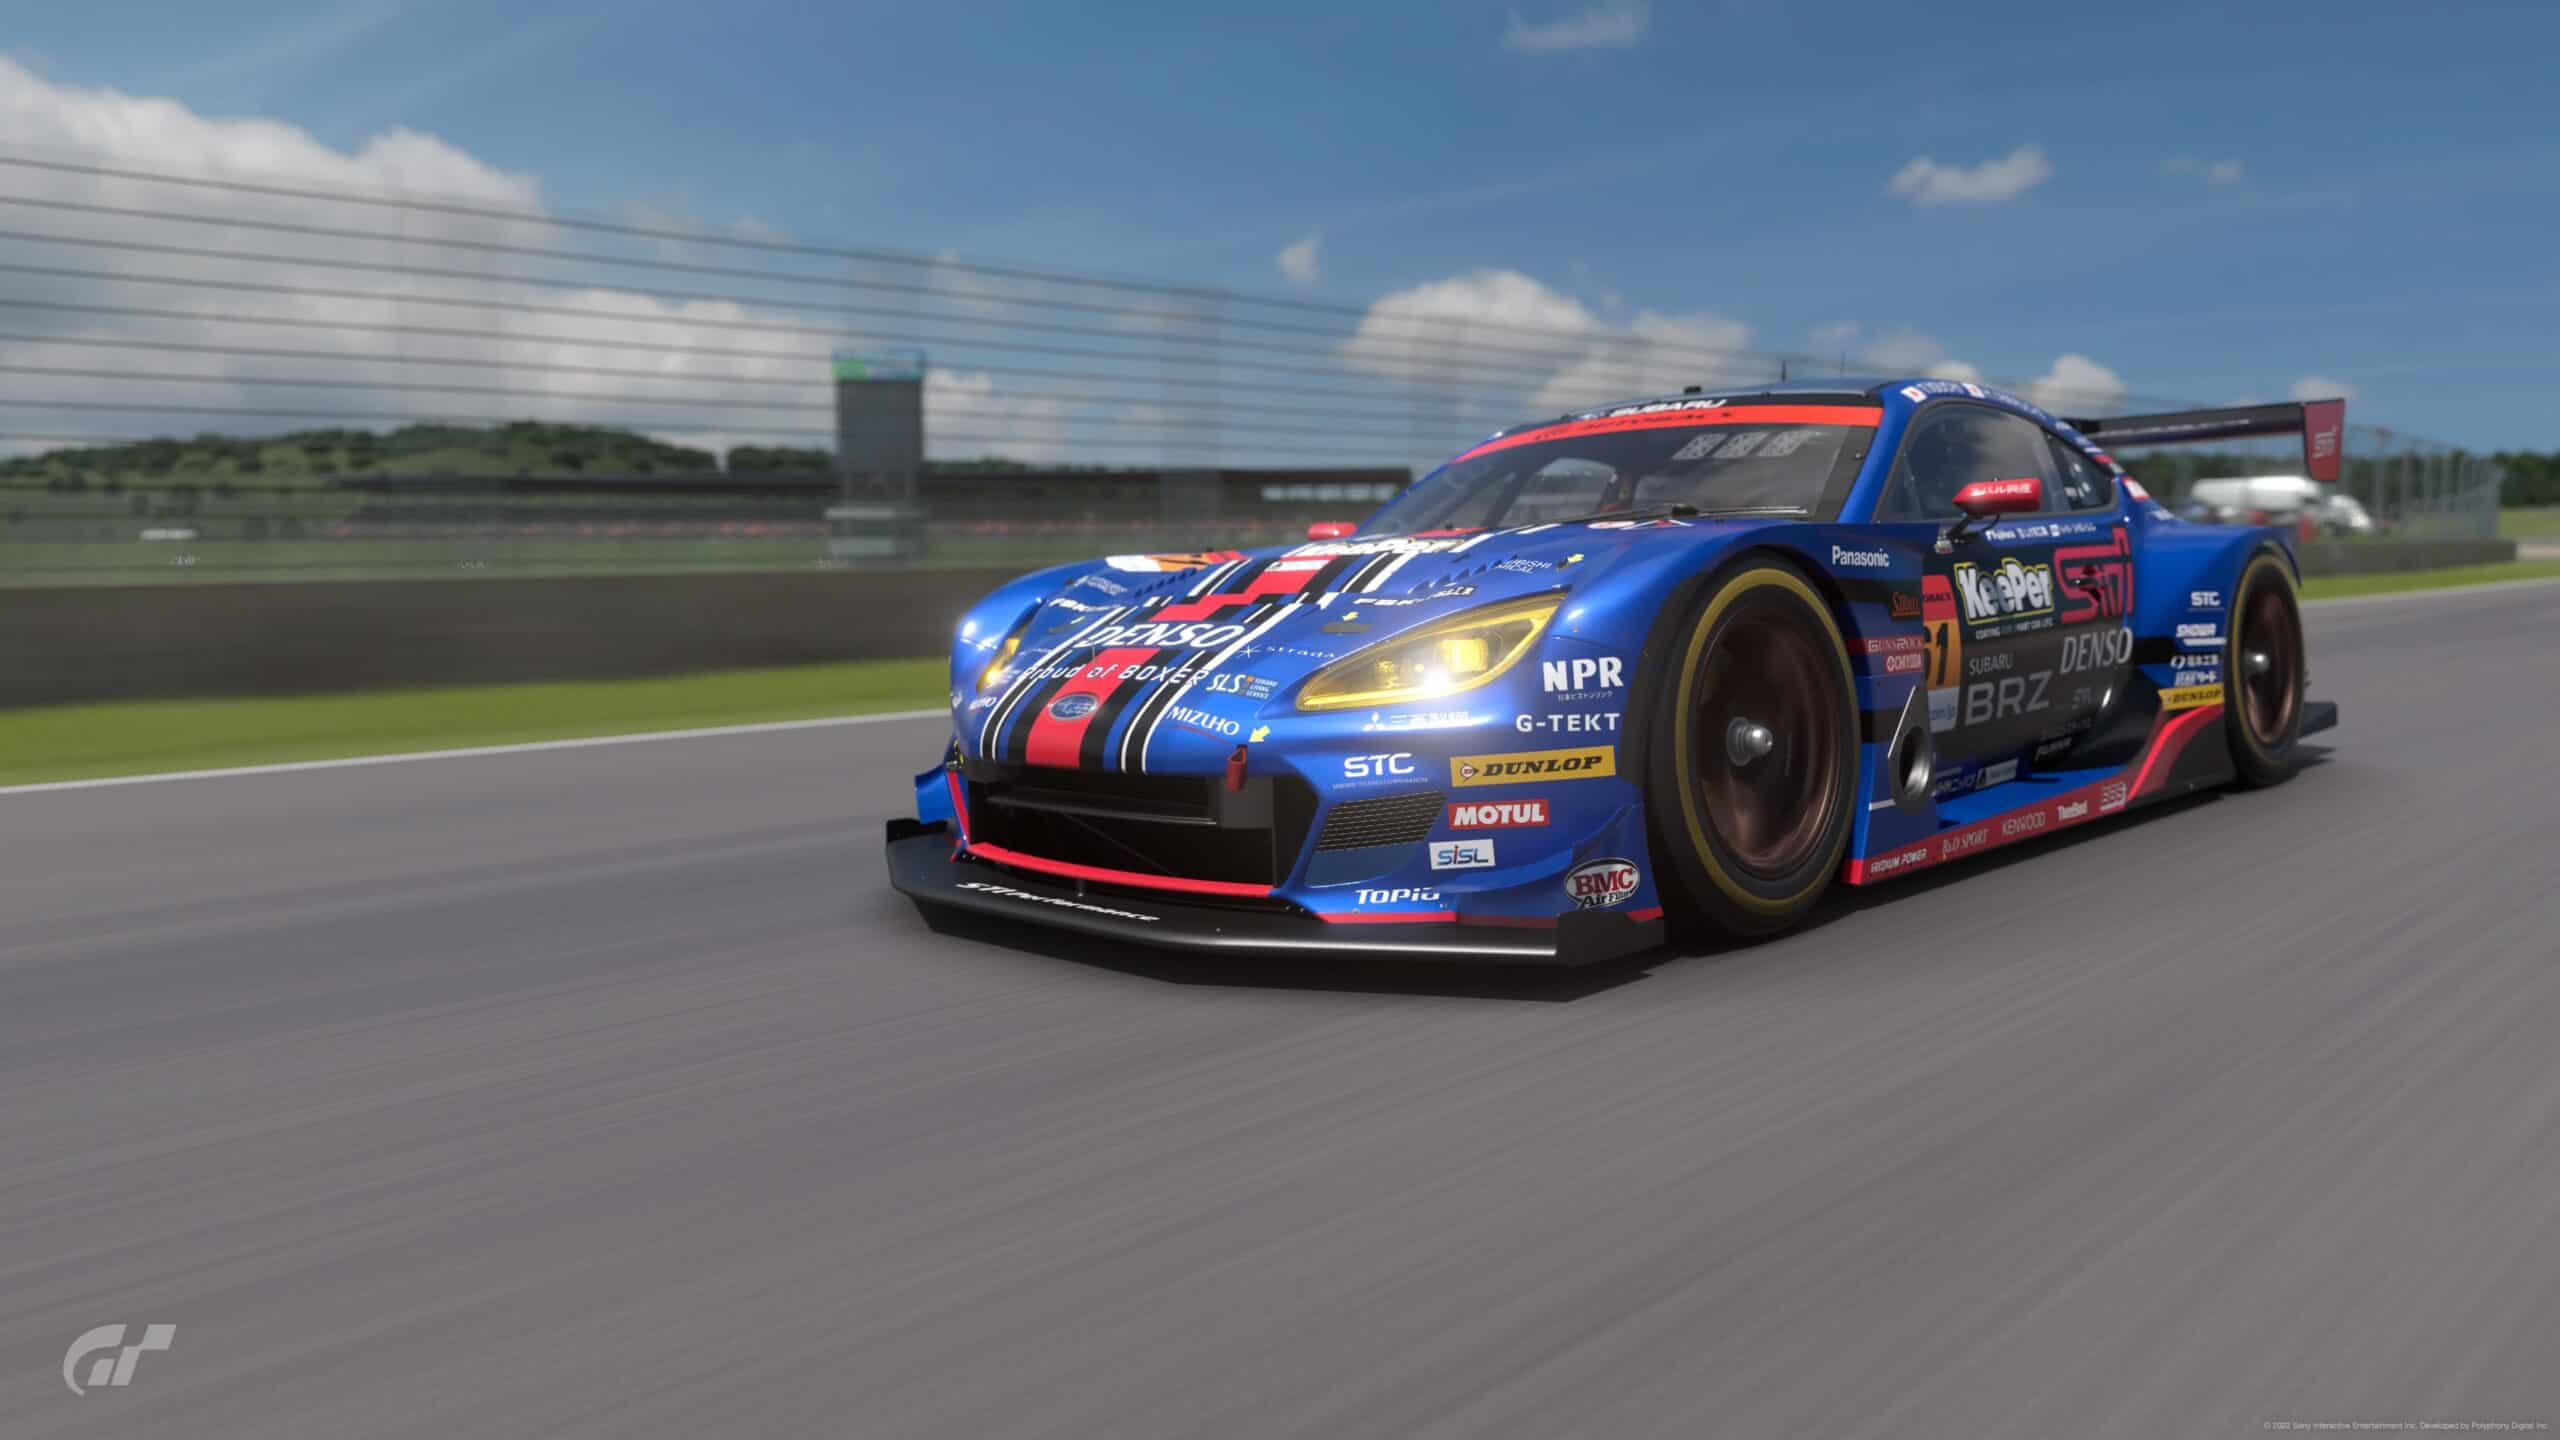 Gran Turismo 7's free April 1.13 update live, adds new cars and extra Spa layout